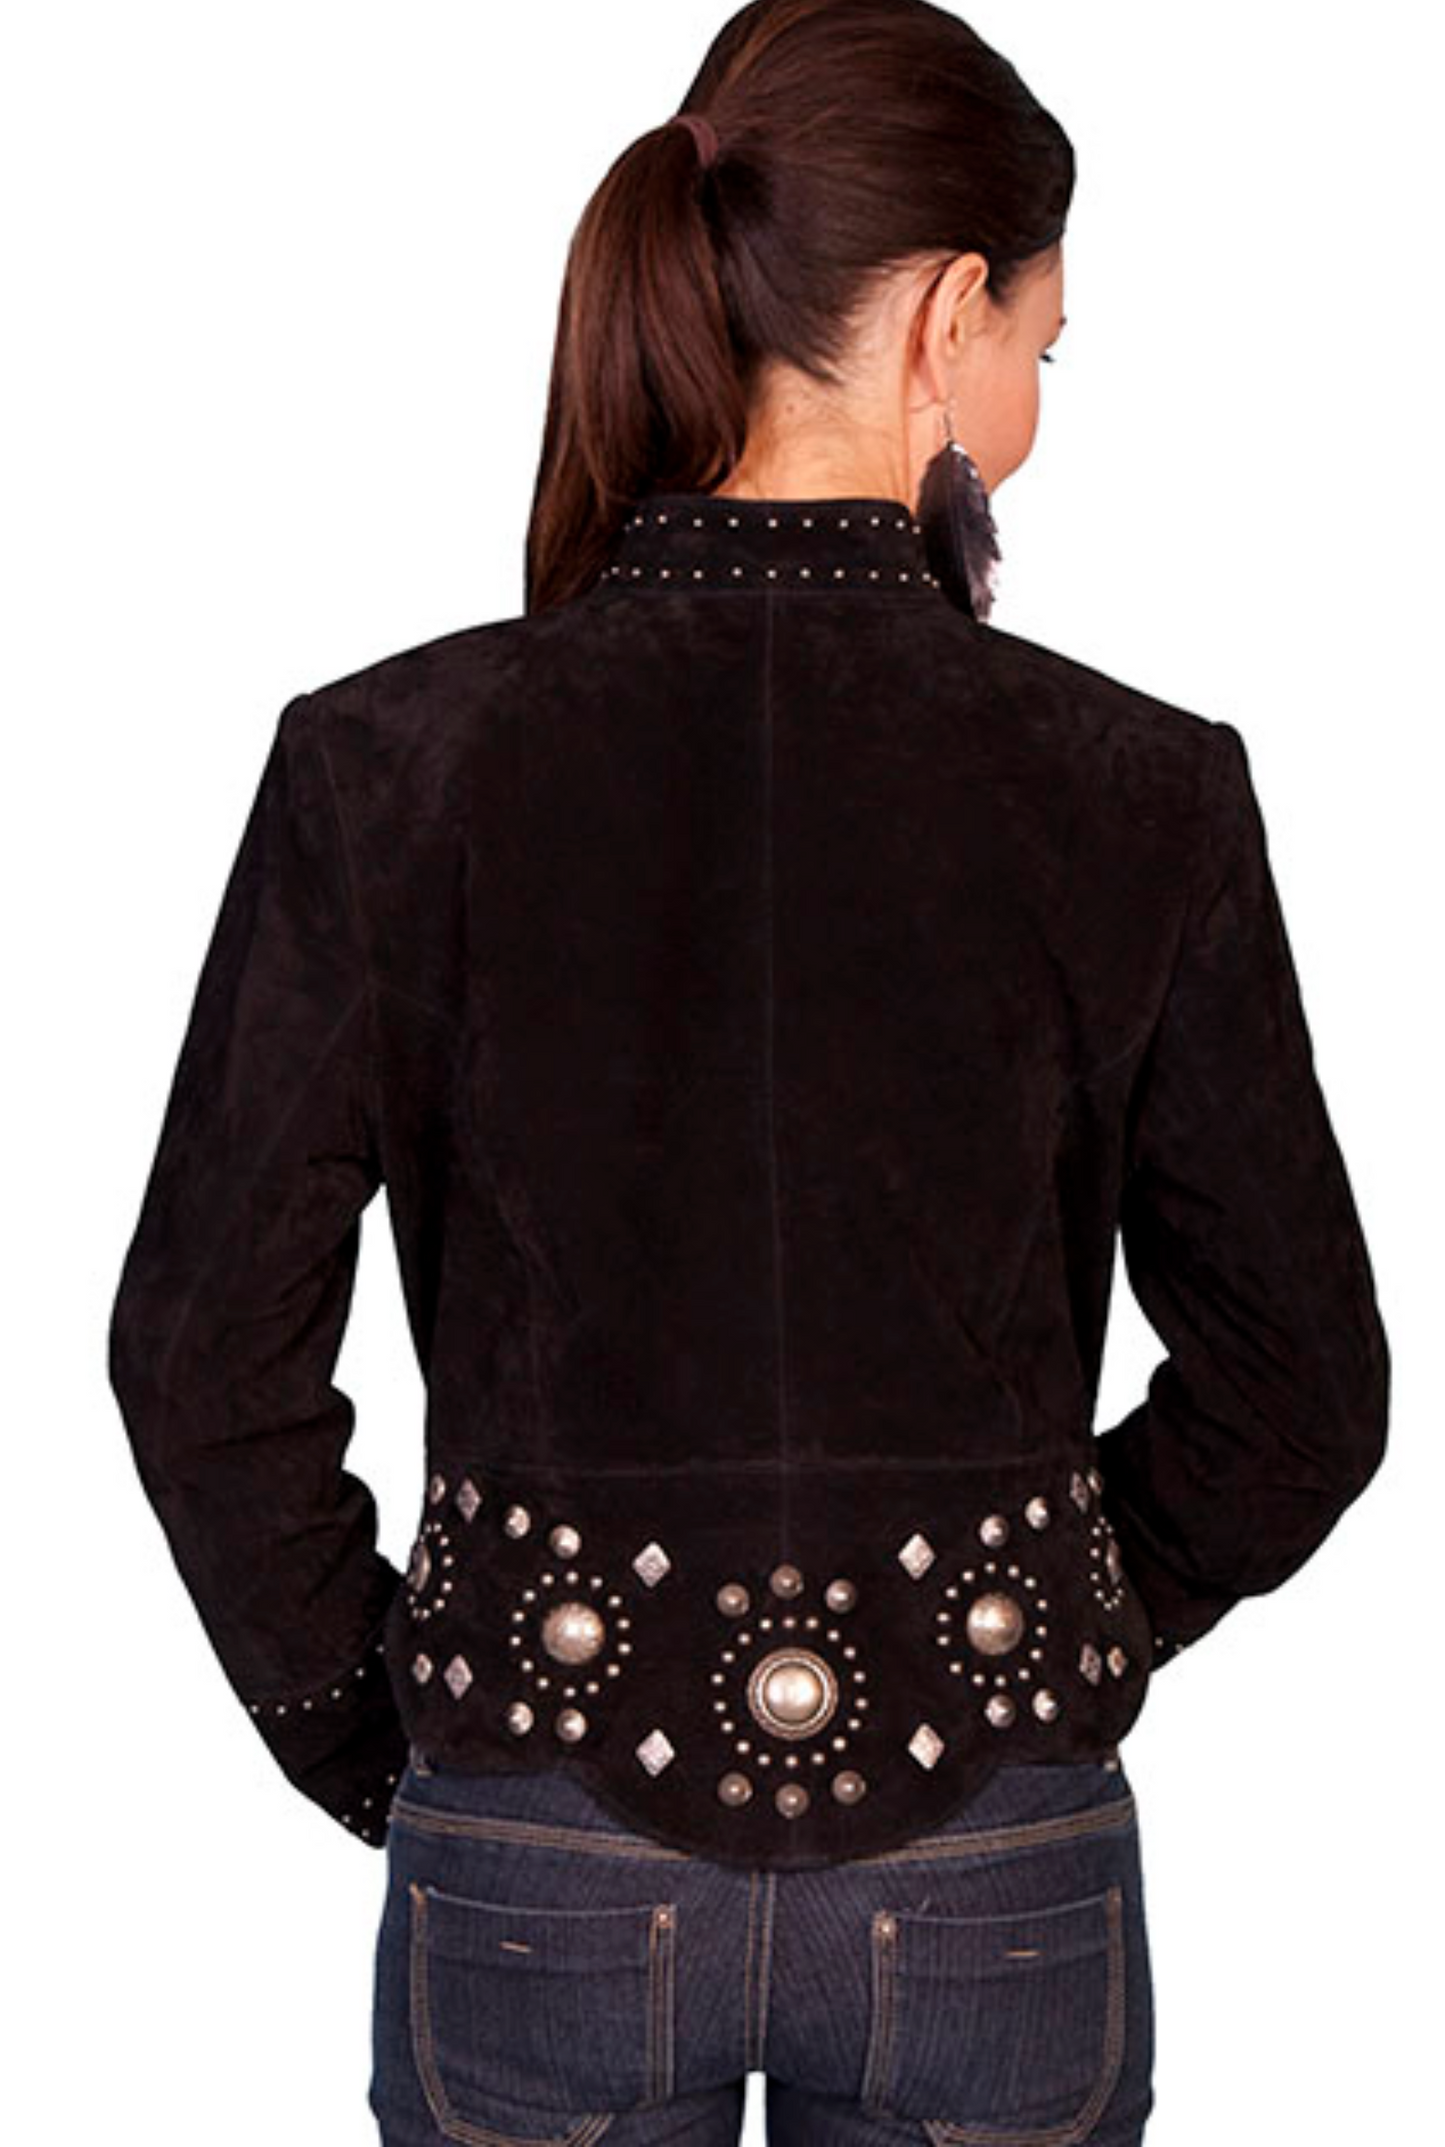 Scully Tell Me About It, Stud Jacket by Scully